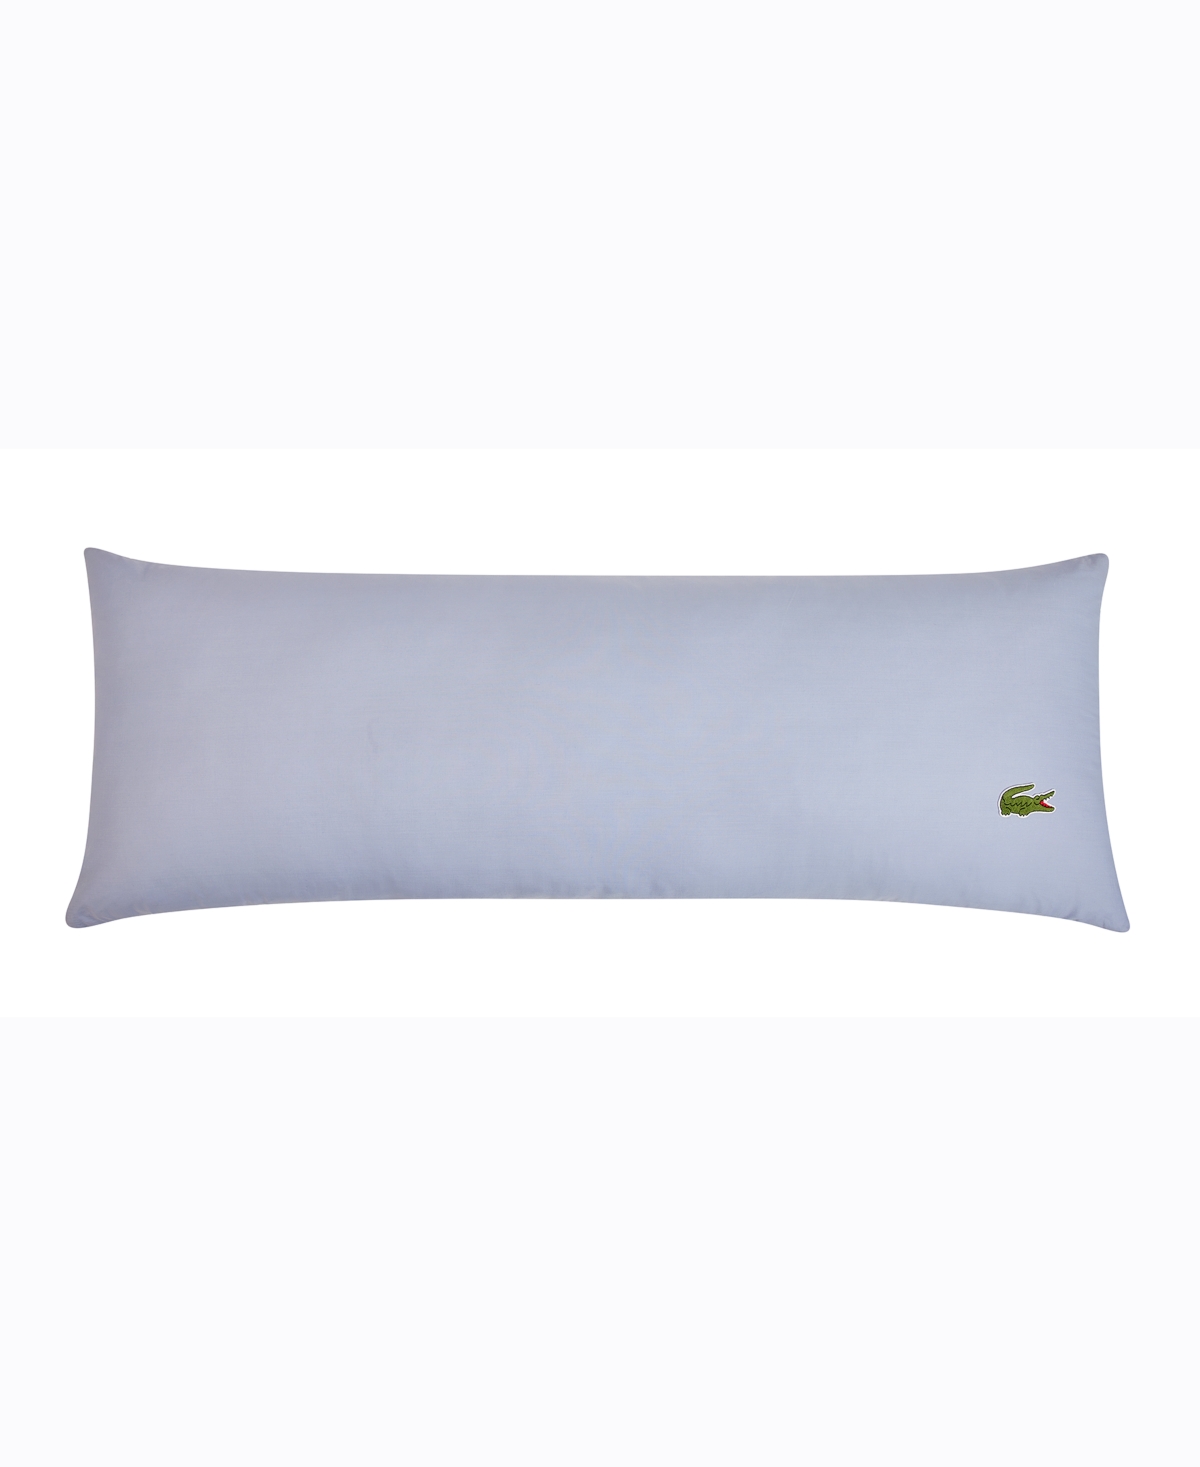 Lacoste Home Body Pillow Bedding In Light Blue